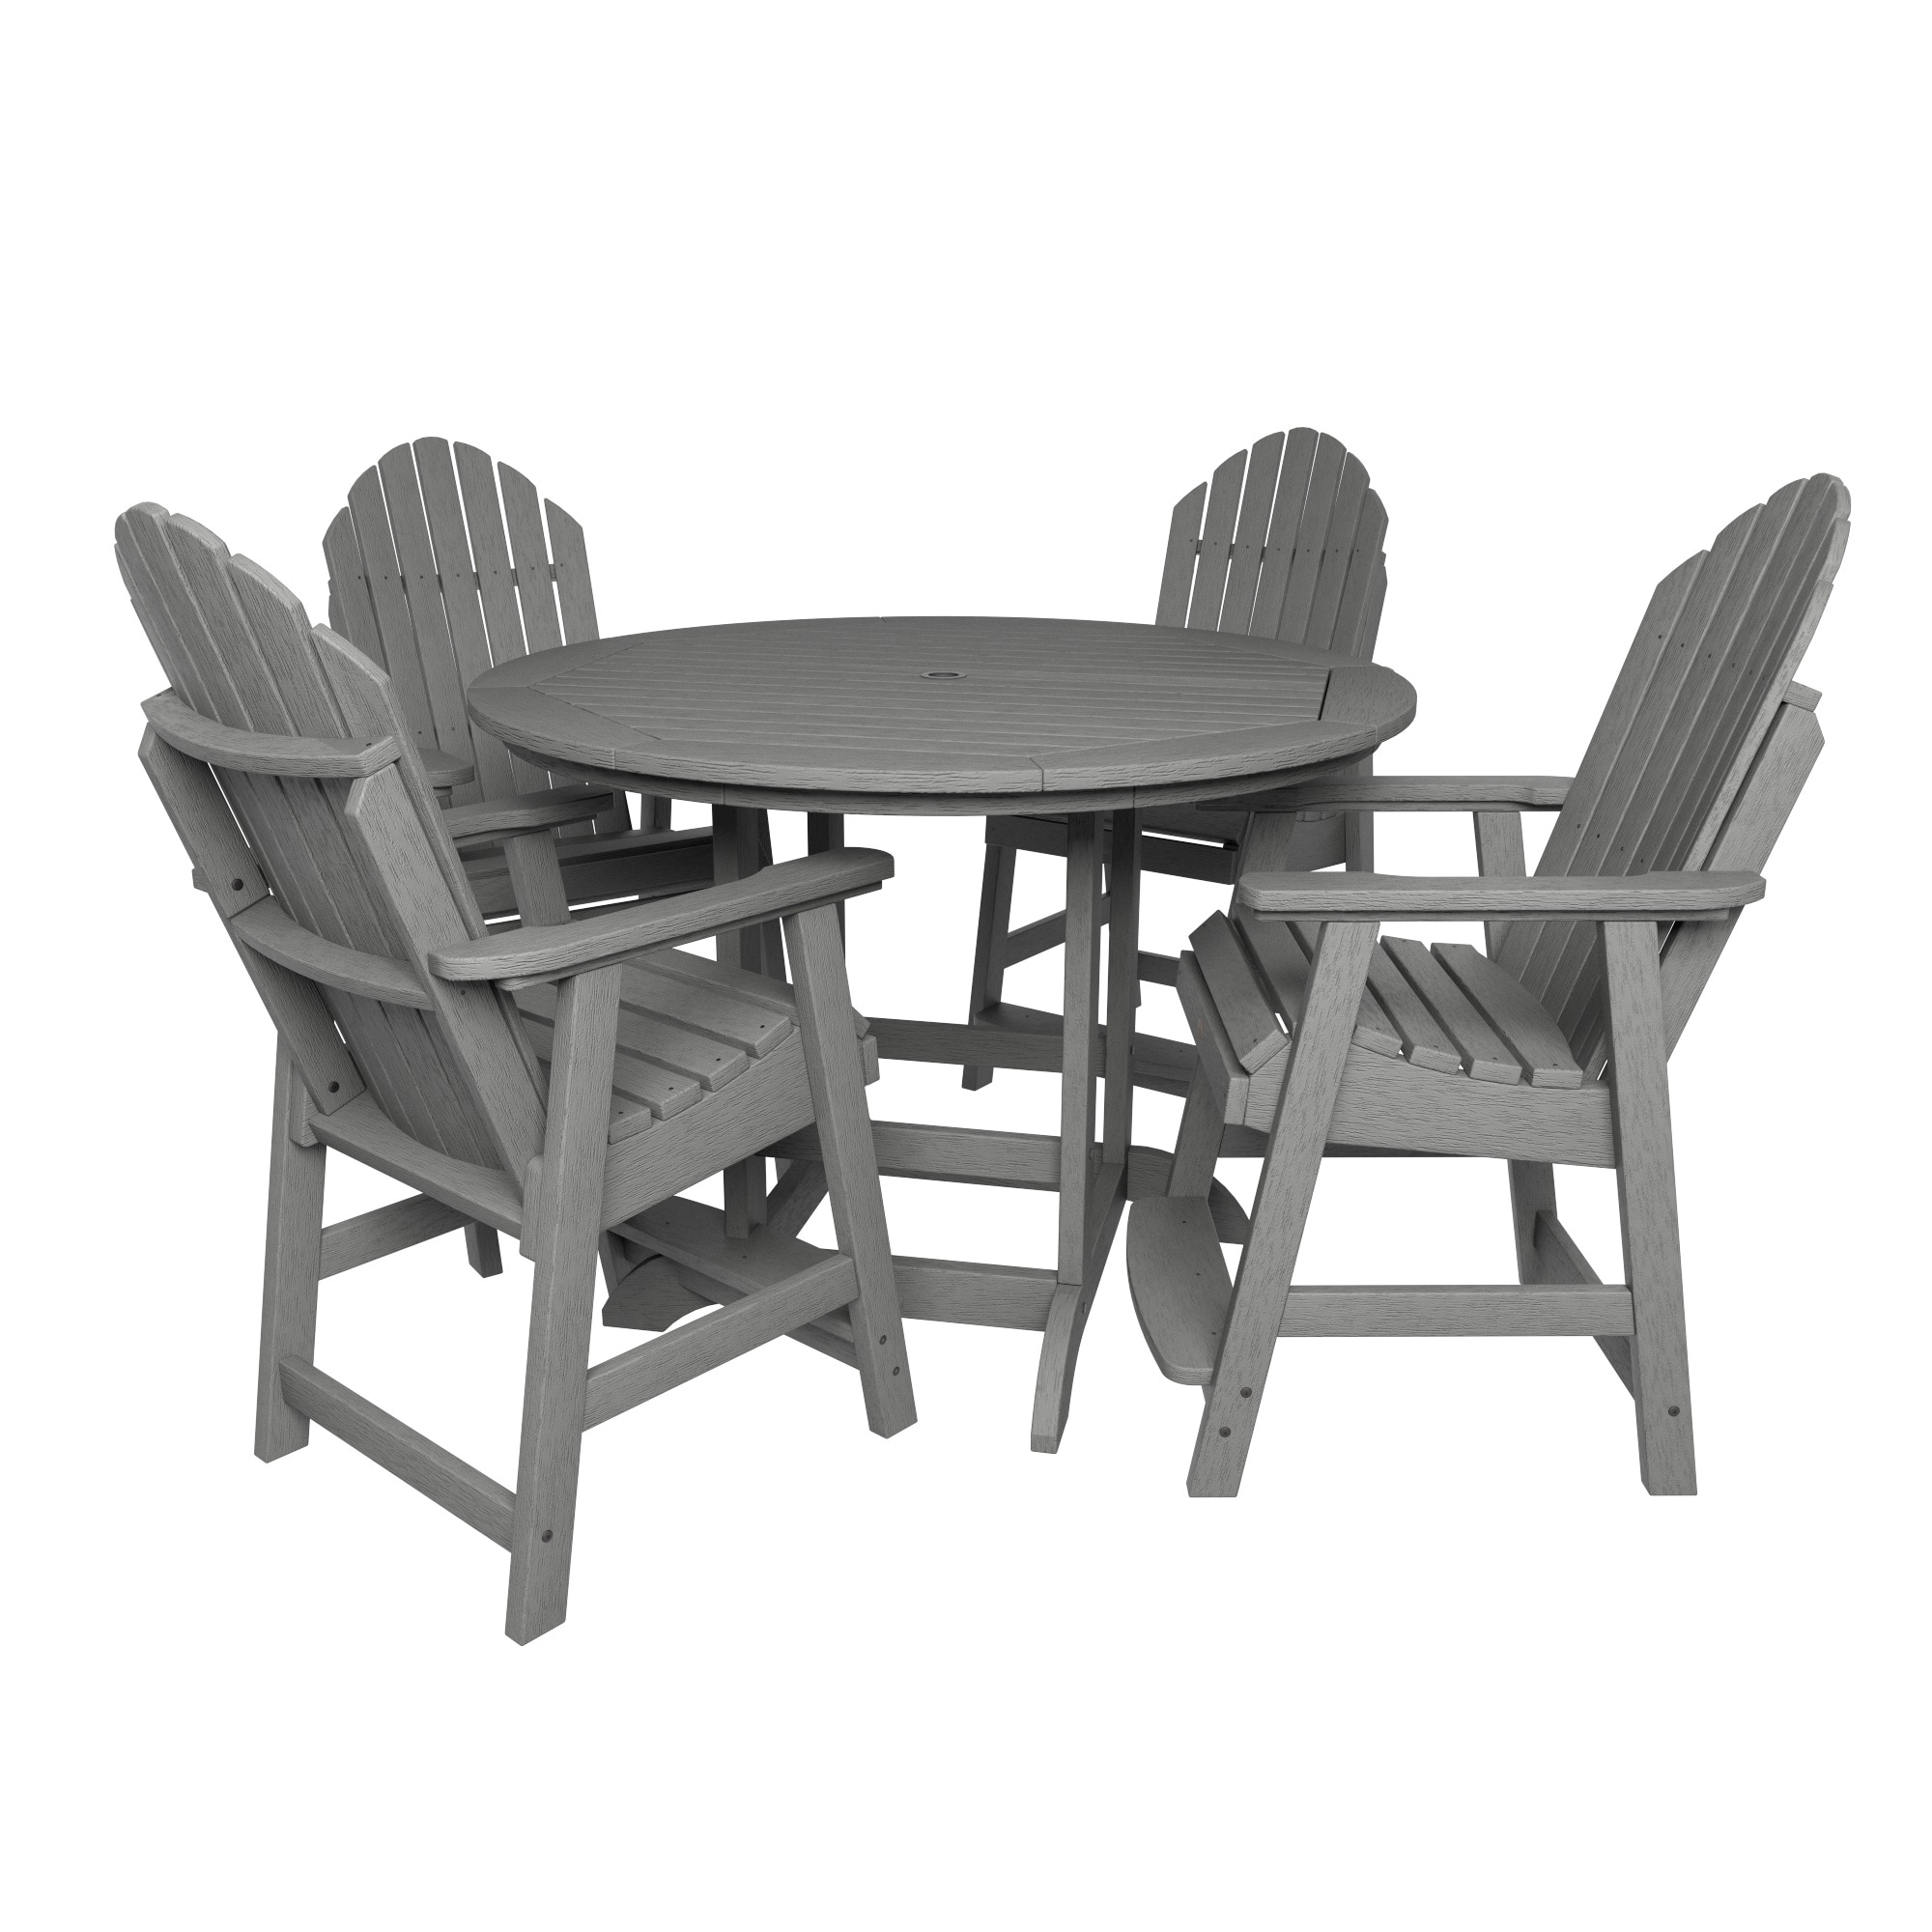 Hamilton 5-piece Outdoor Dining Set - 48 Round Table  Counter-height